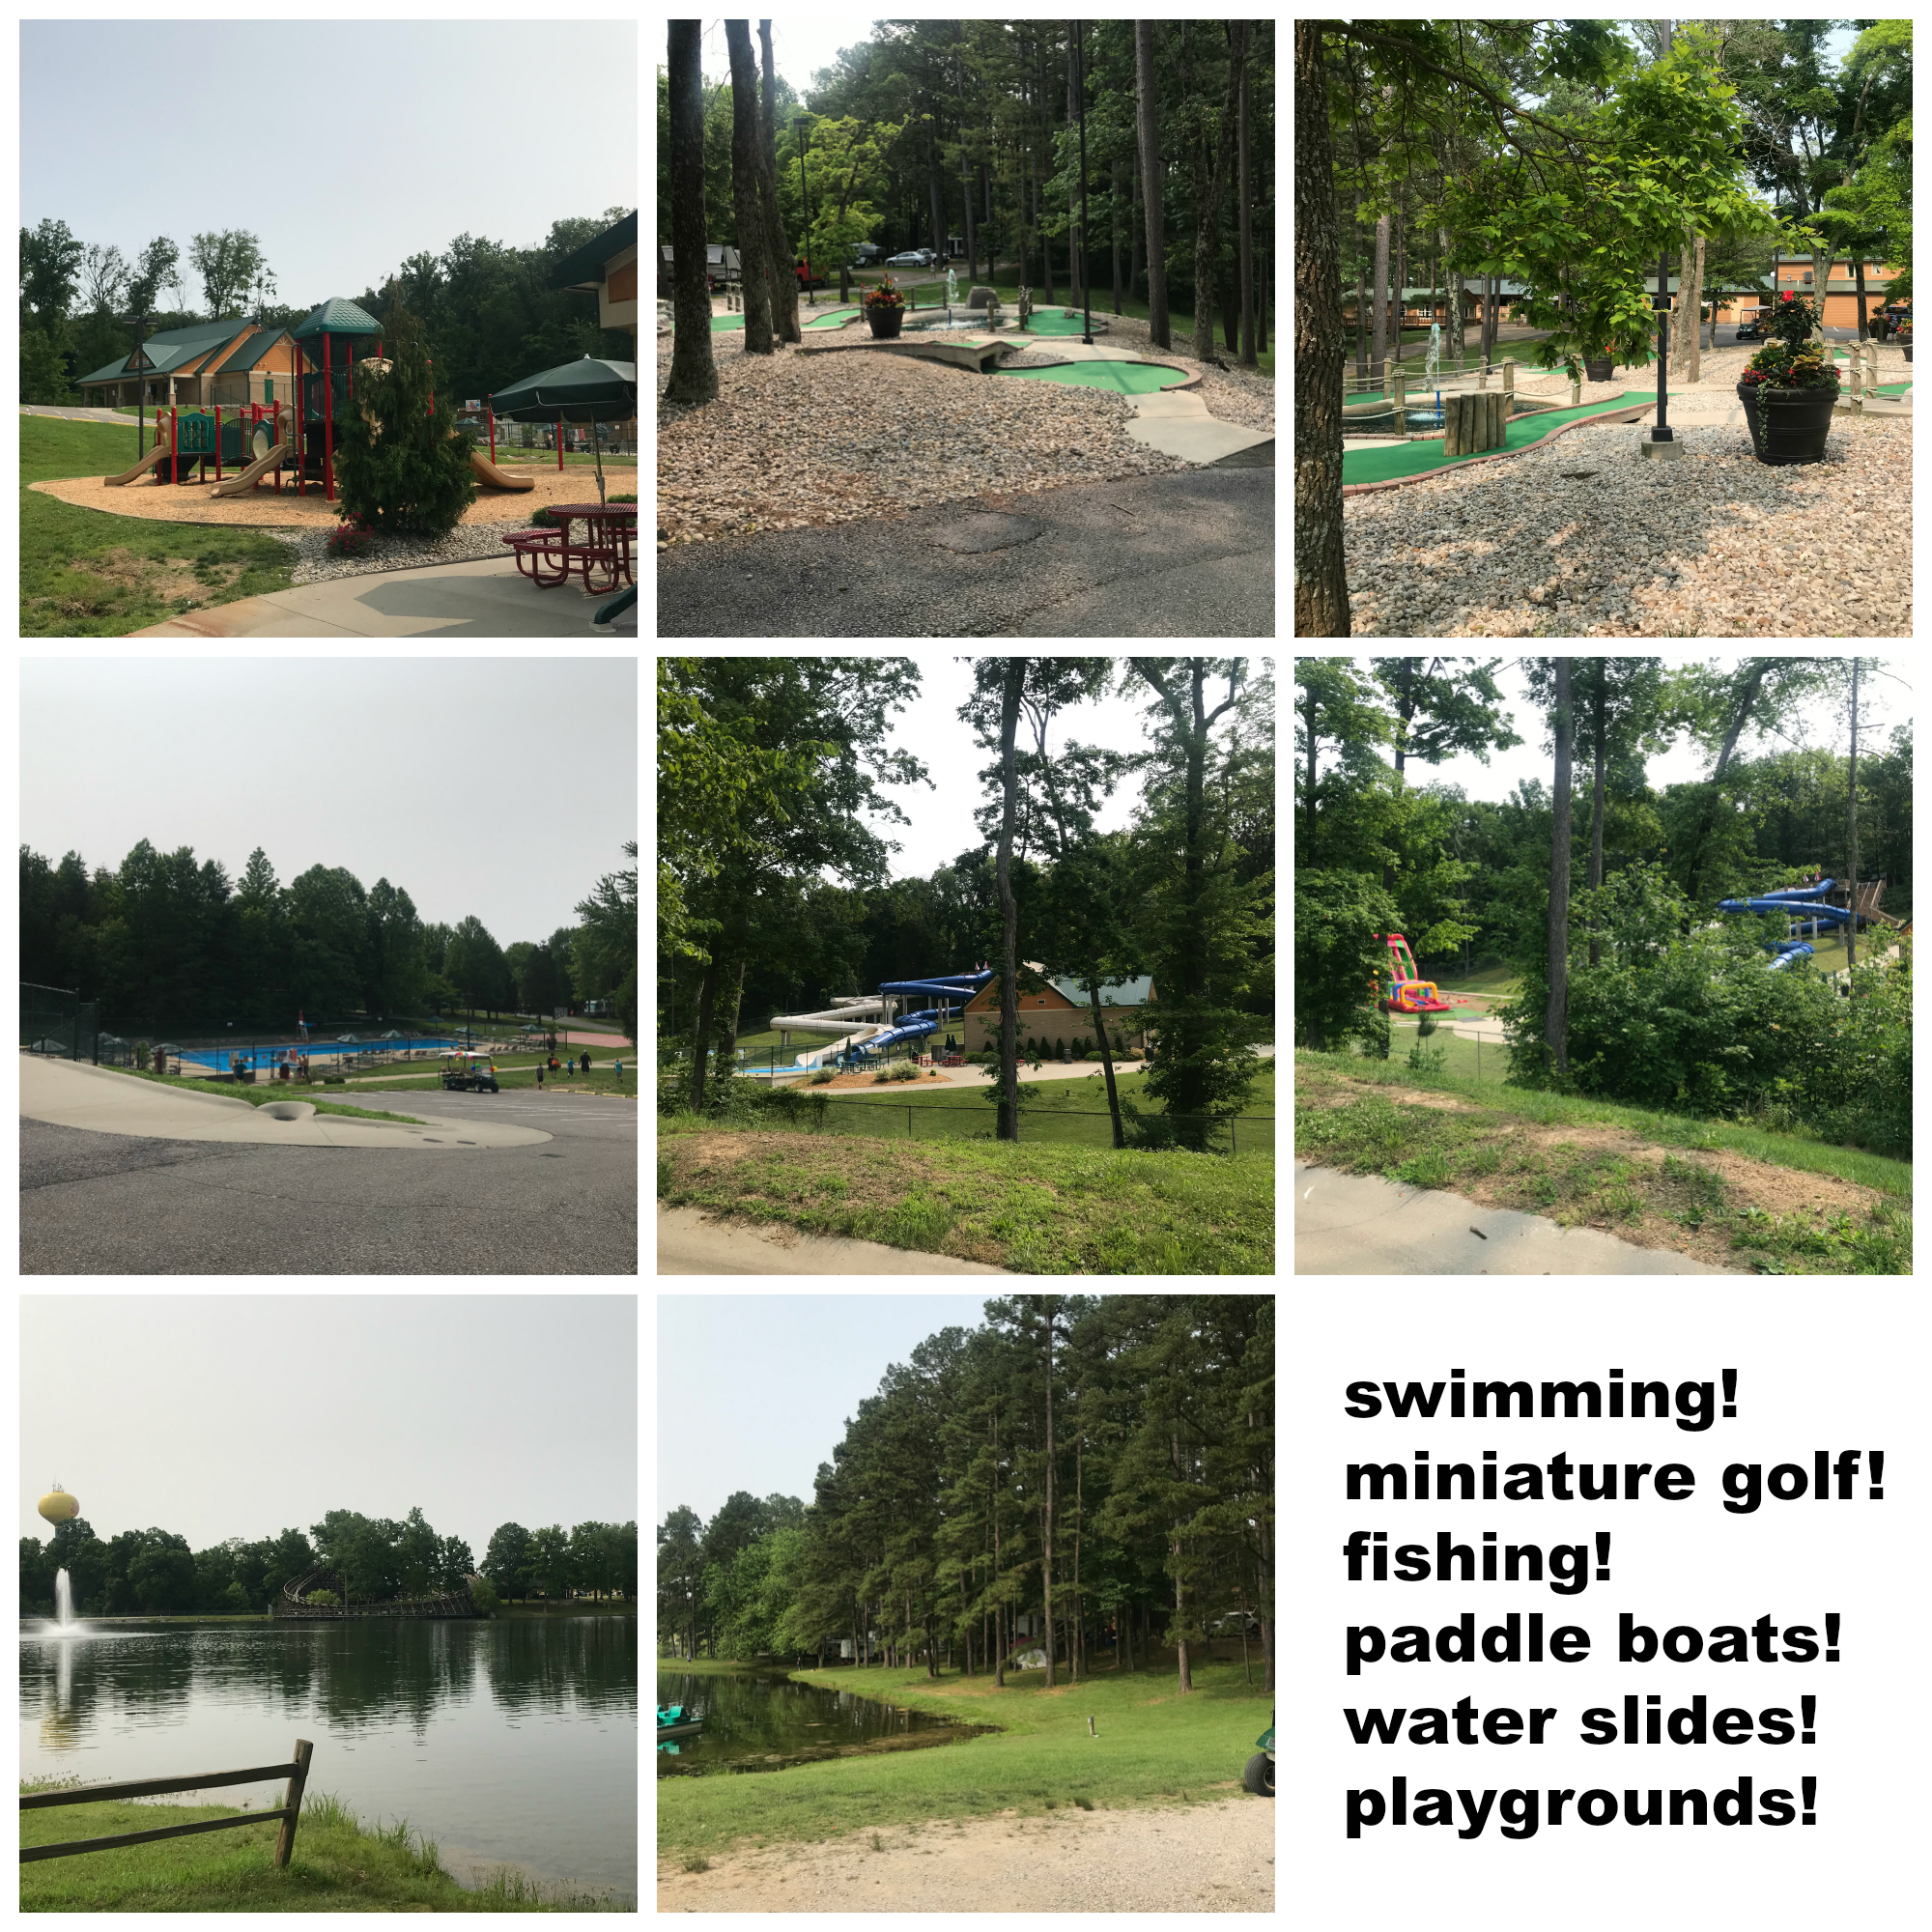 Lake Rudolph activities. Swimming pool, miniature golf, fishing, paddle boats, water slides, and playgrounds.